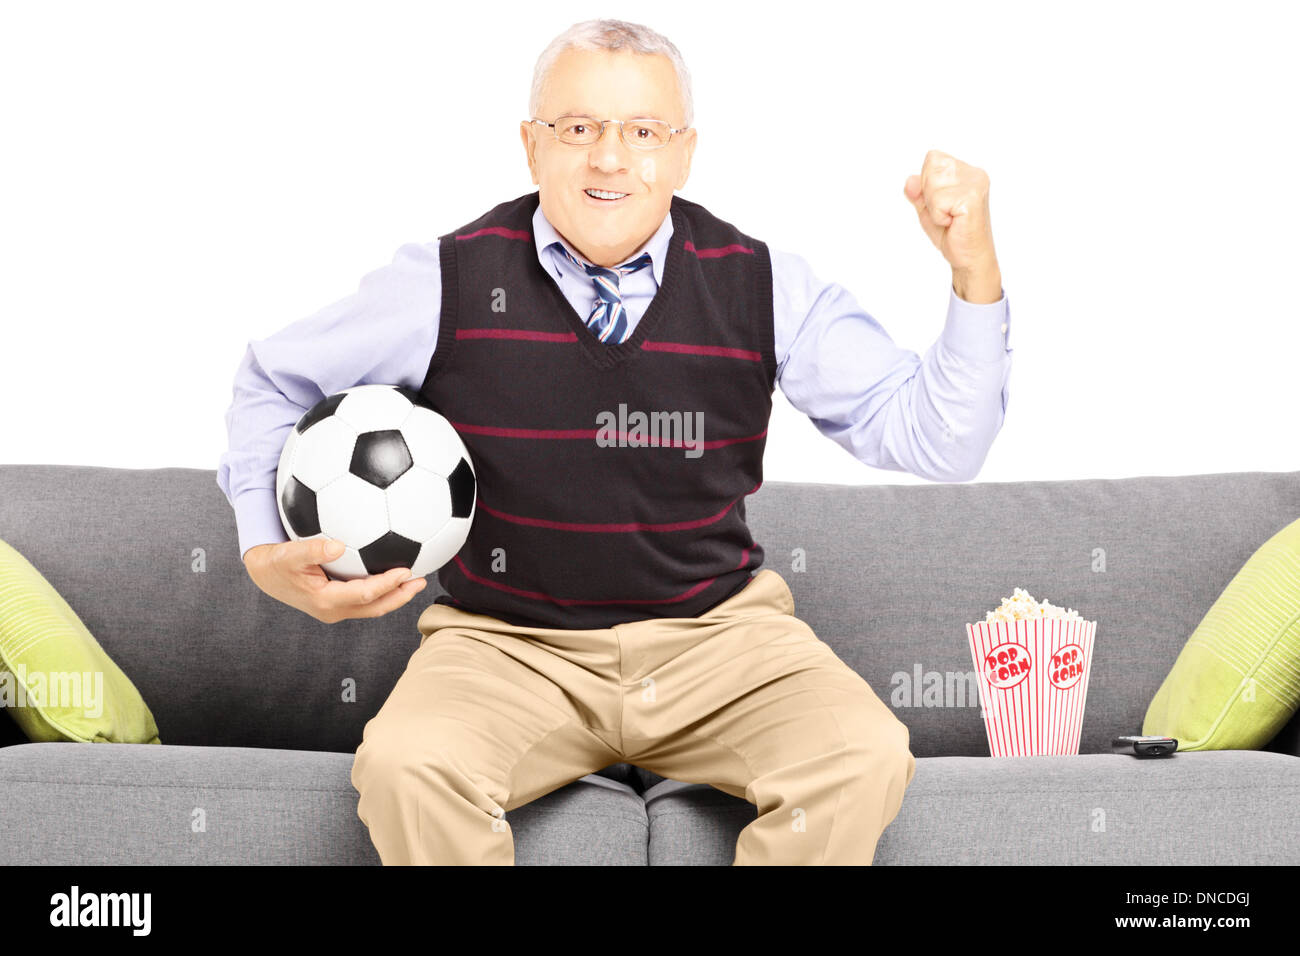 Middle aged sport fan holding a soccer ball and watching sport Stock Photo